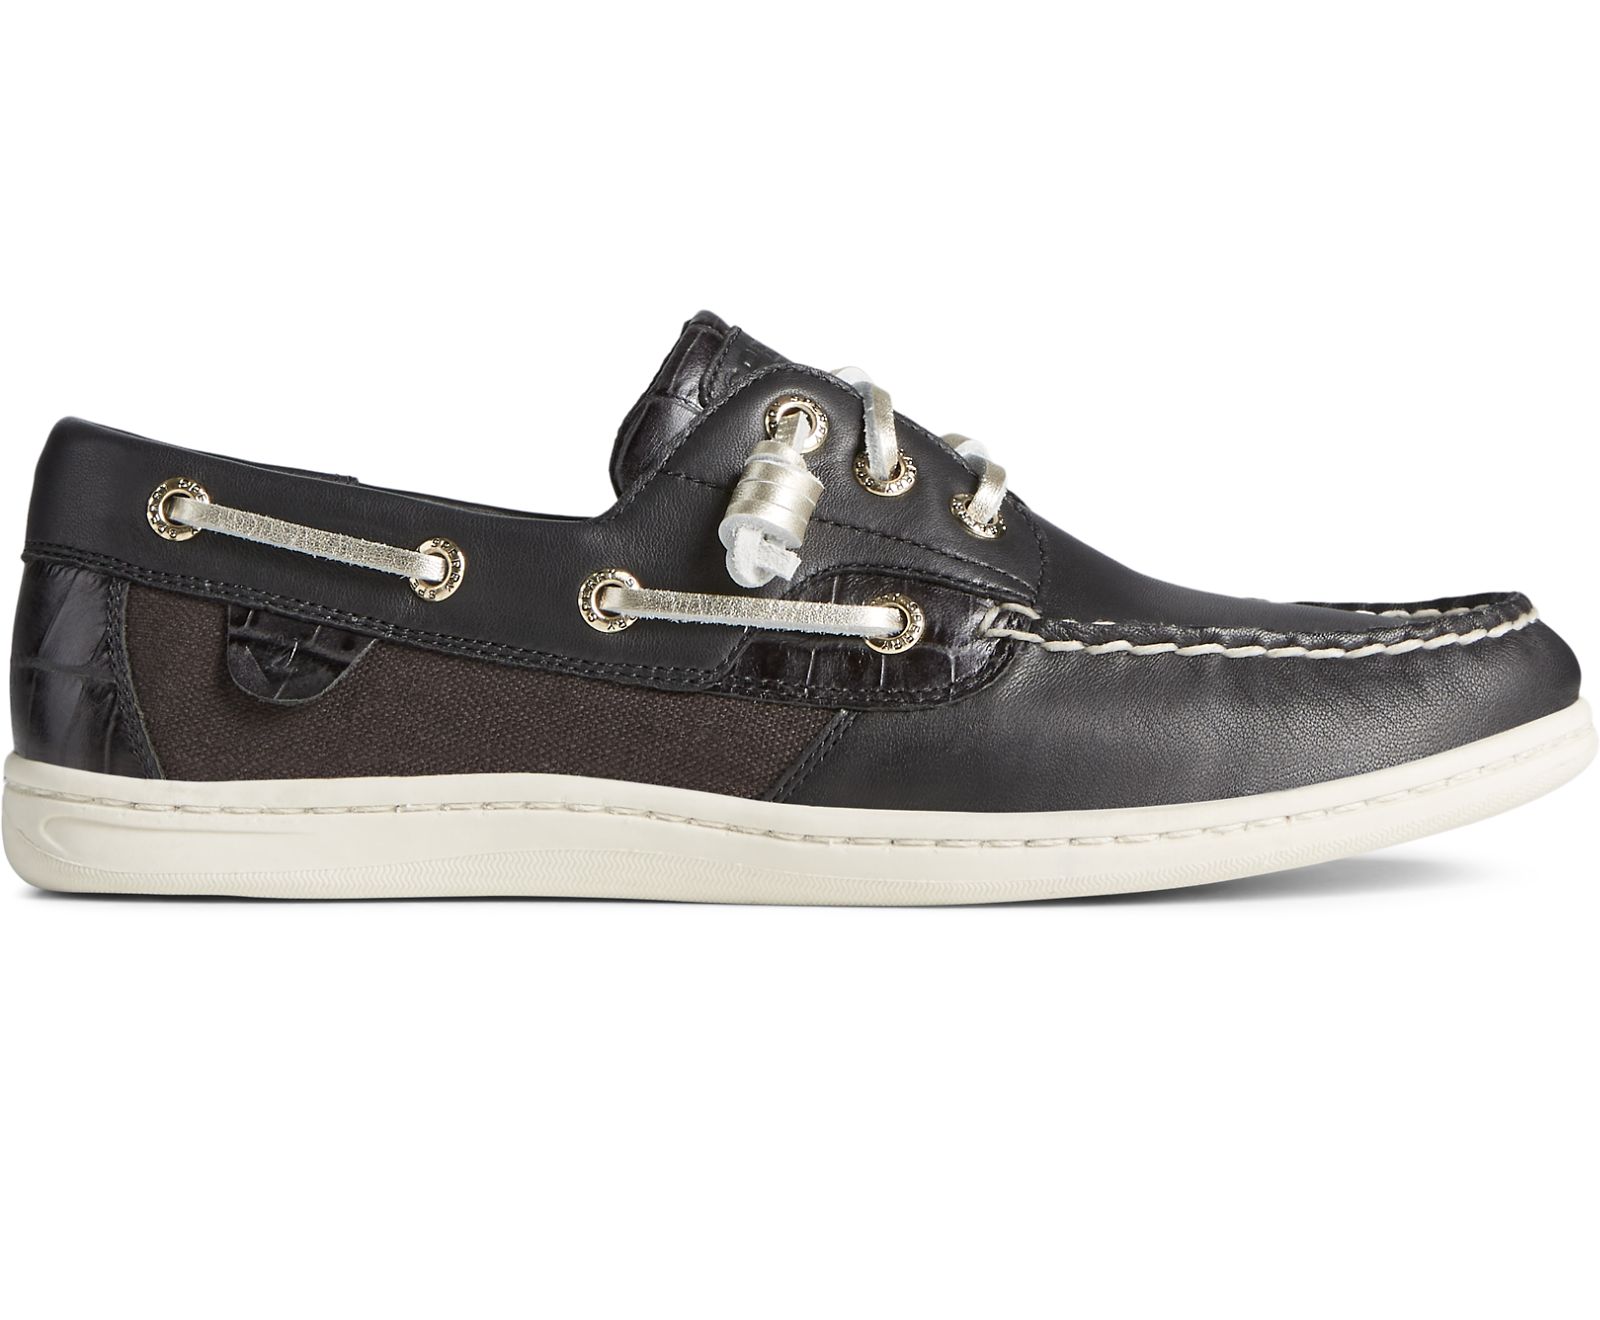 Women's Songfish Croc Leather Boat Shoe - Black - Click Image to Close